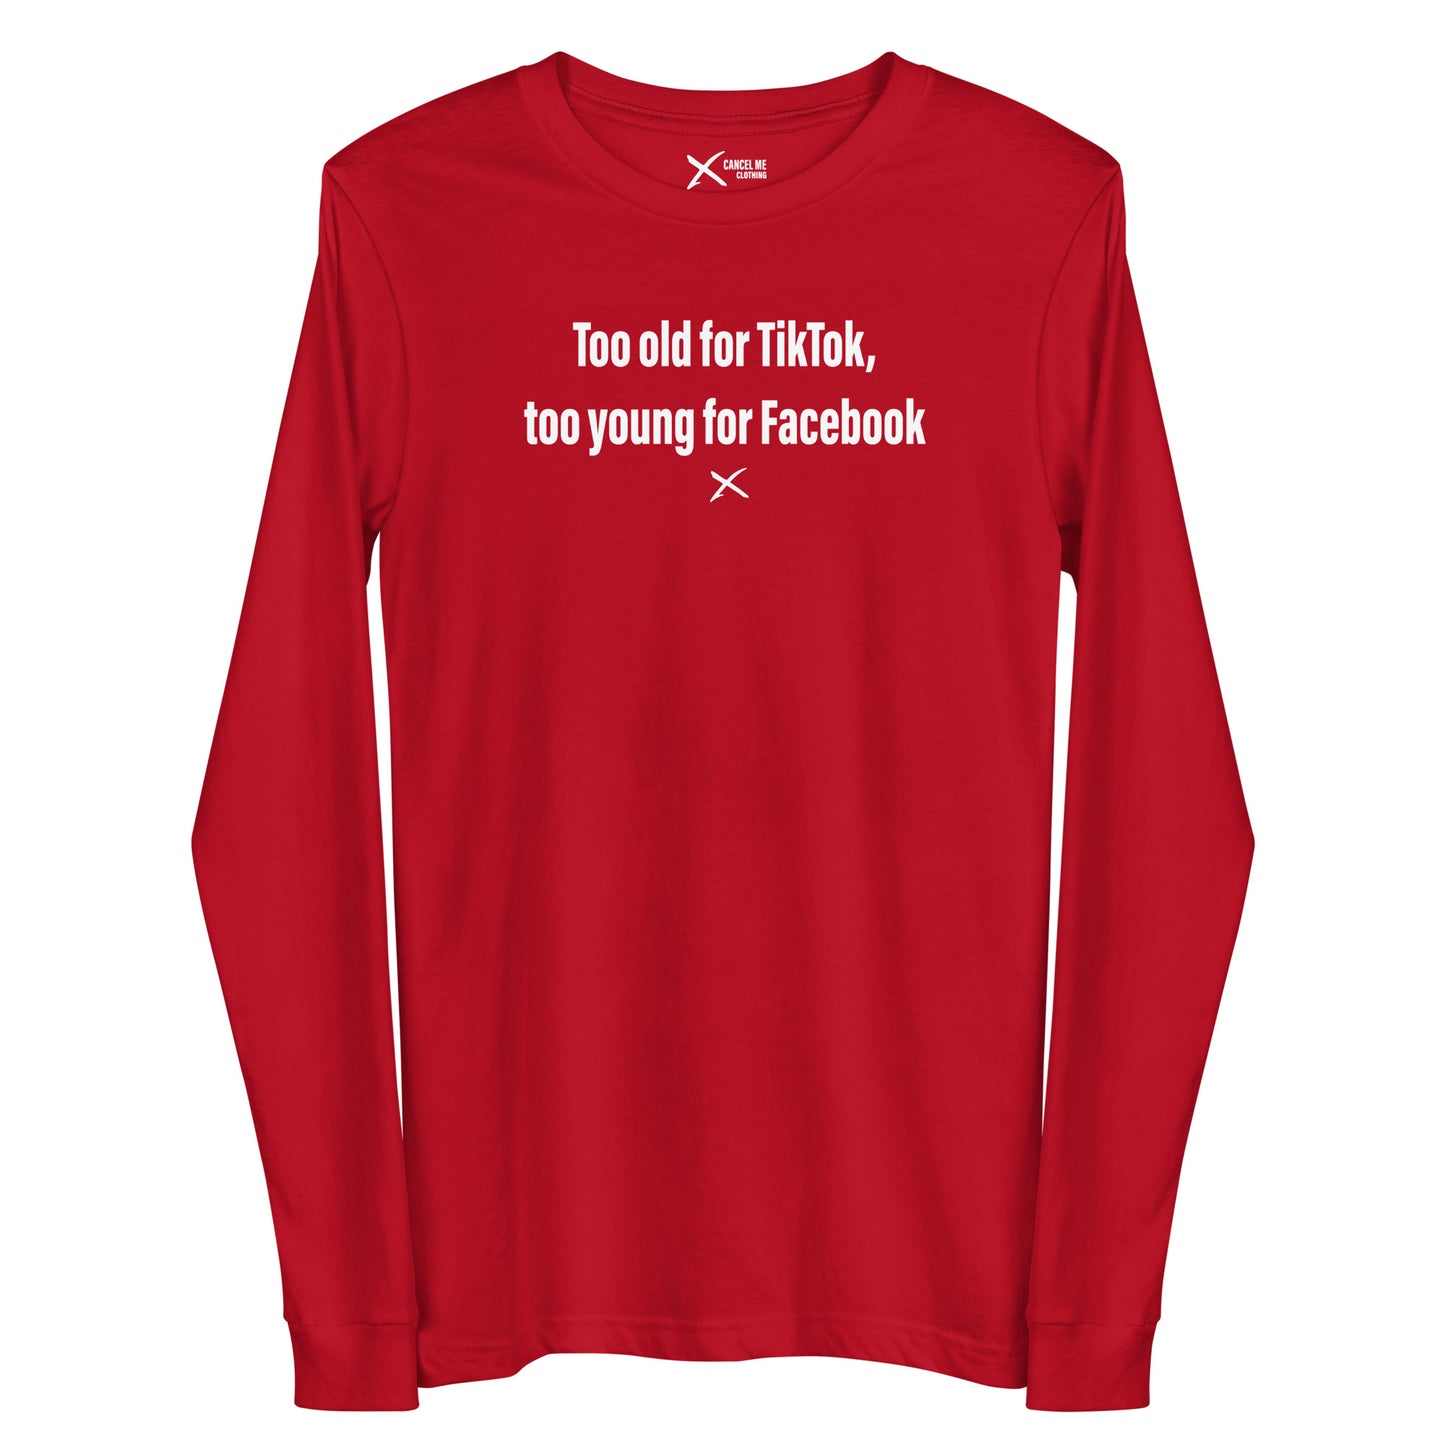 Too old for TikTok, too young for Facebook - Longsleeve